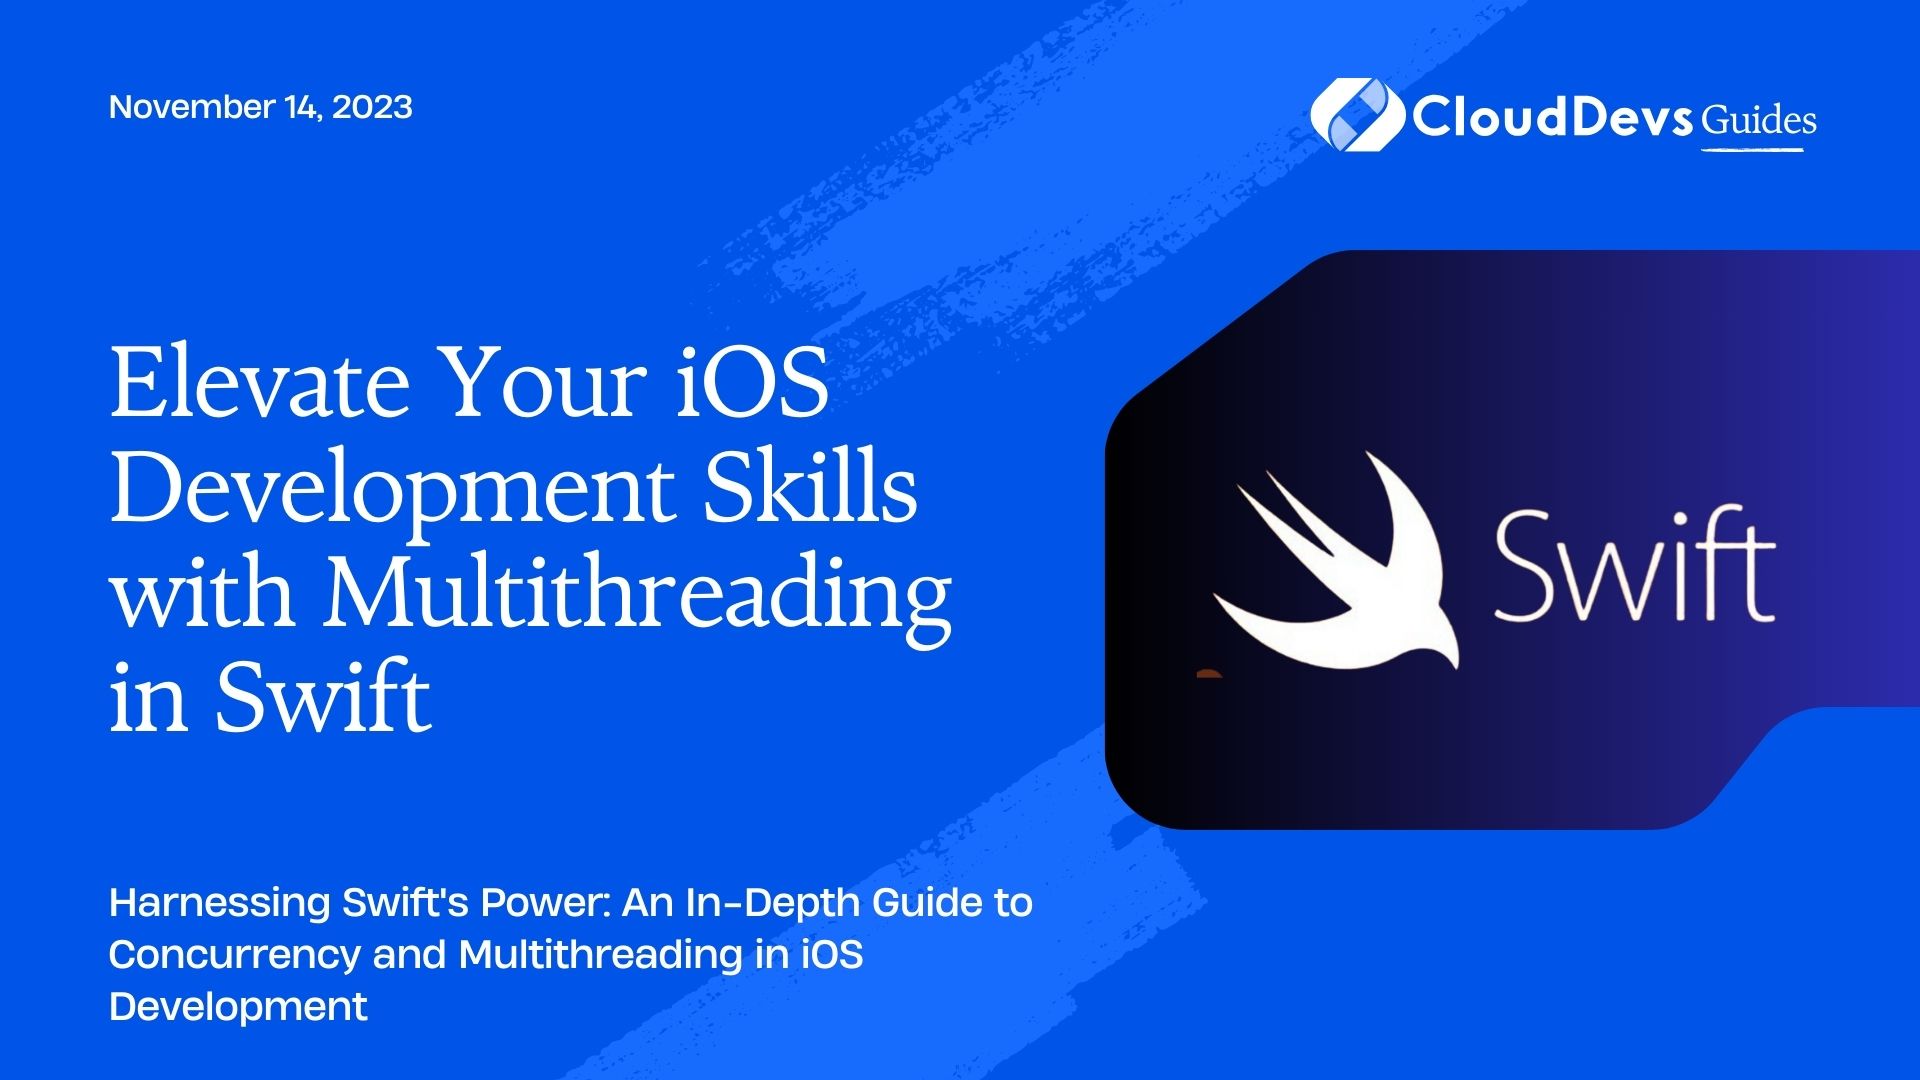 Elevate Your iOS Development Skills with Multithreading in Swift